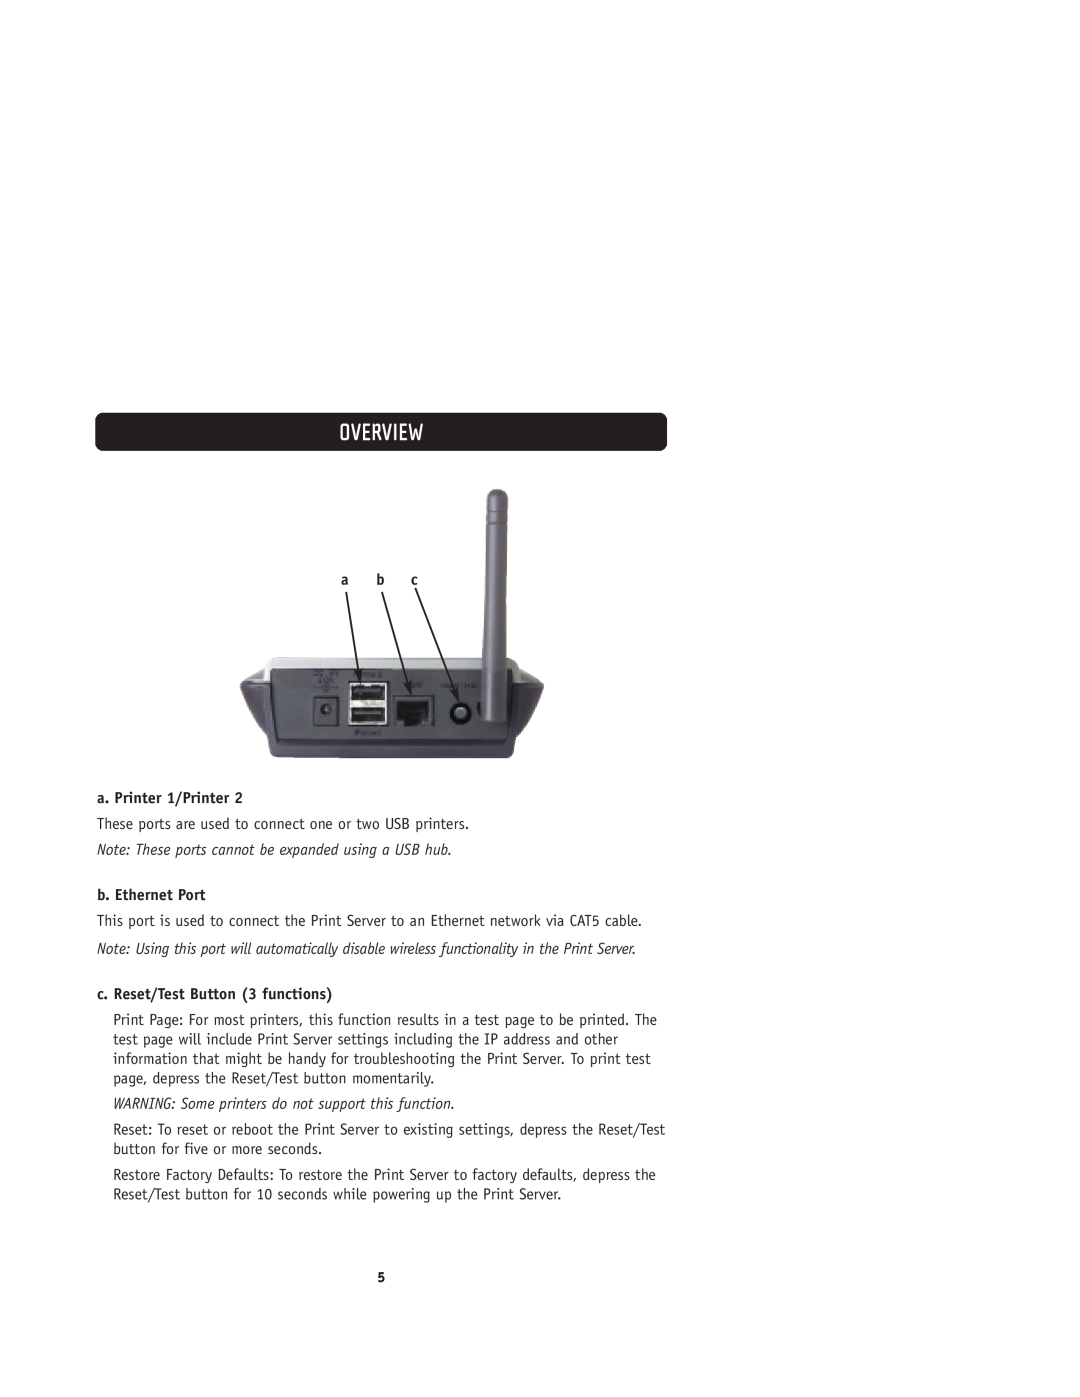 Belkin F1UP0001 user manual Overview, a b c a. Printer 1/Printer, Note These ports cannot be expanded using a USB hub 